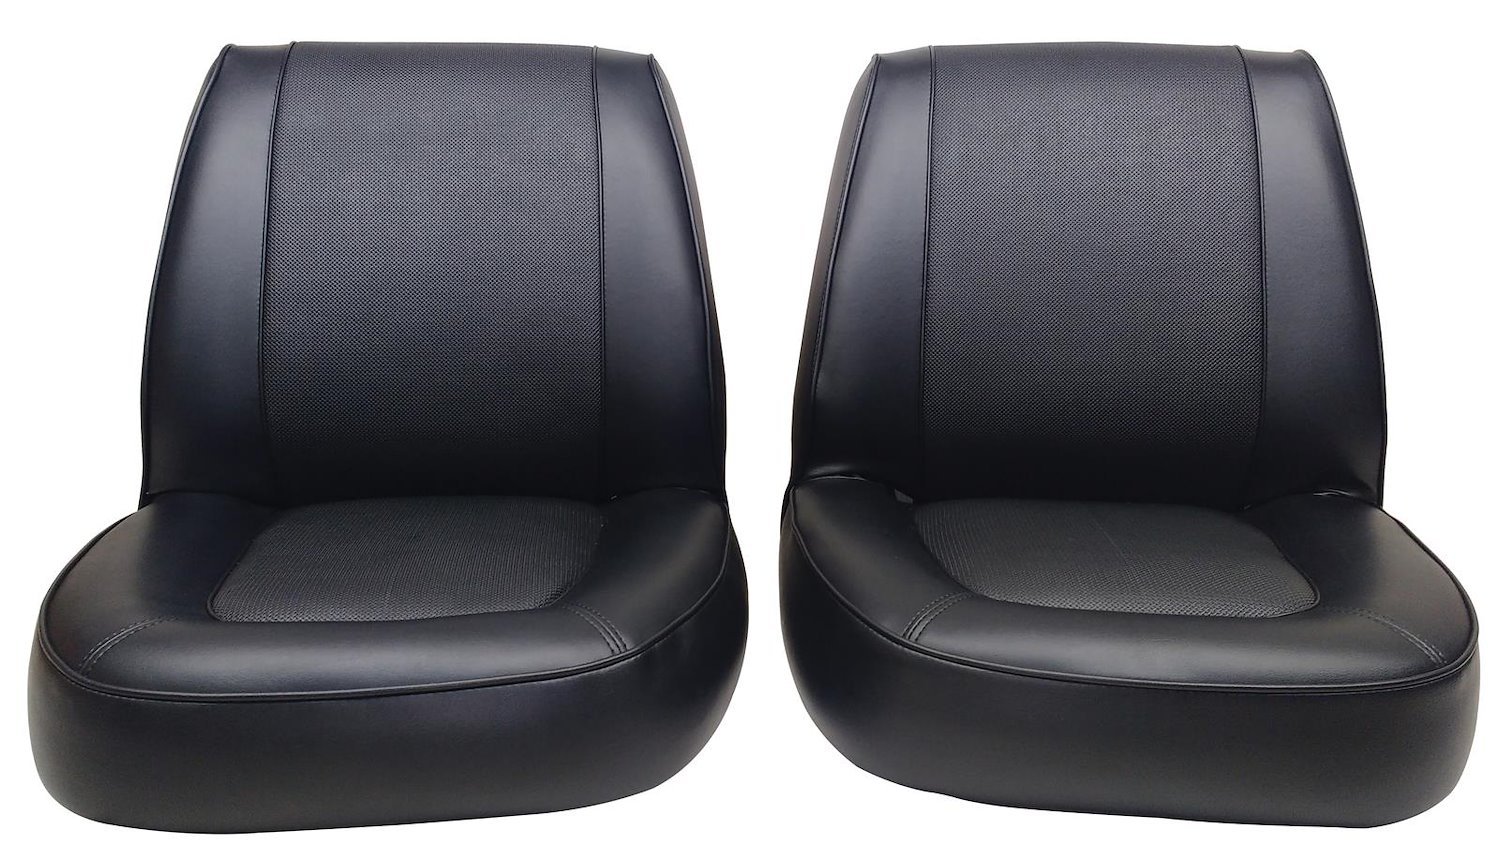 1967 Mercury Cougar Standard and Décor Interior Front Bucket Seat Upholstery Set